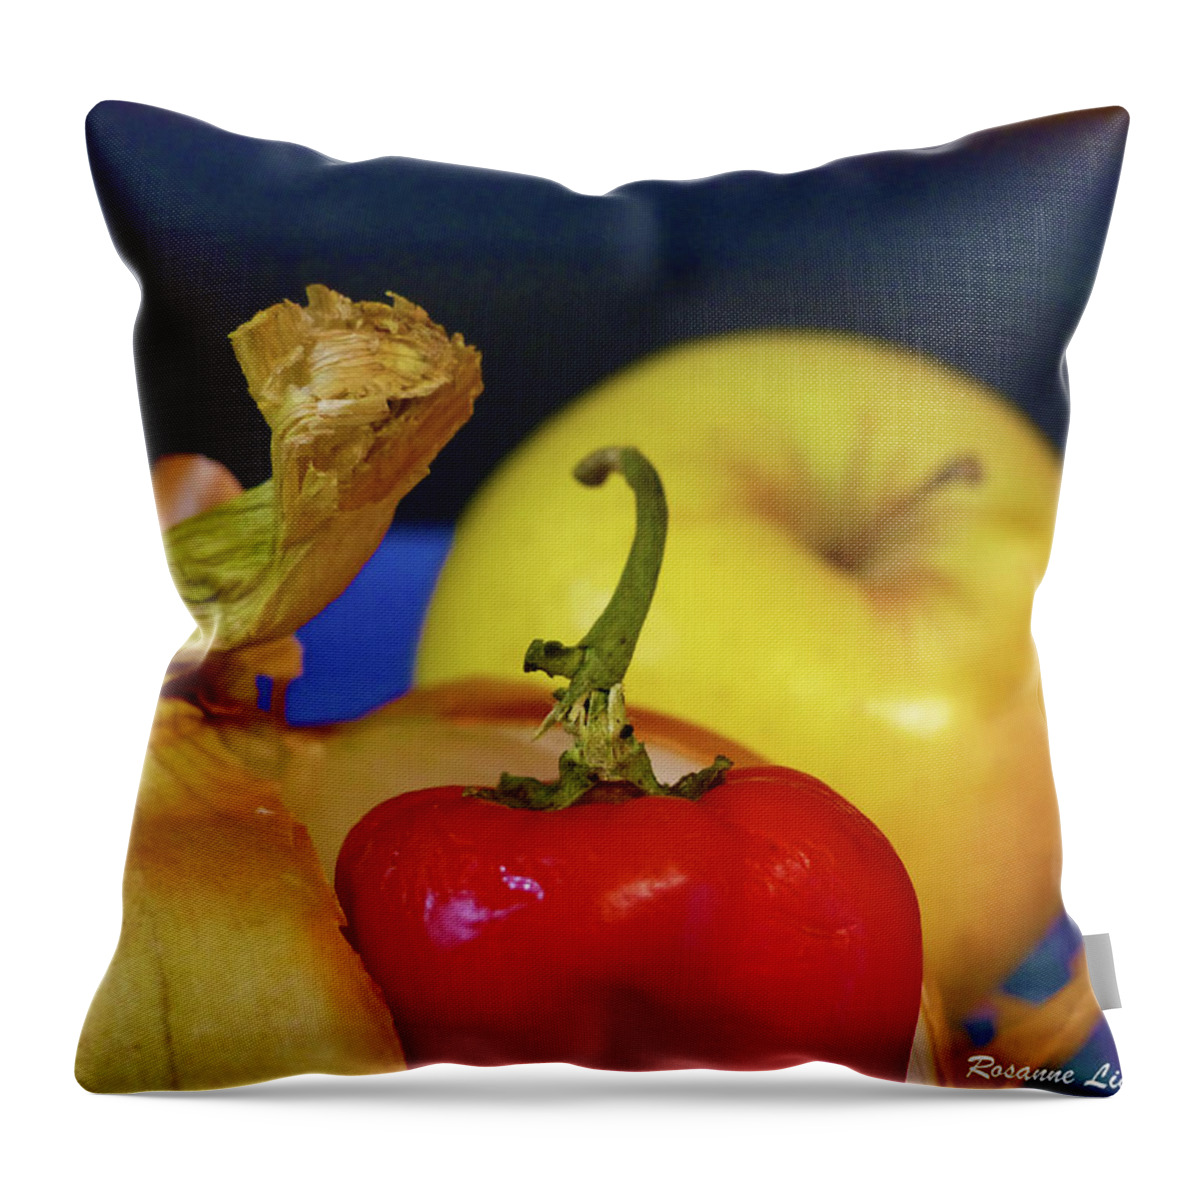 Yellow Delicious Apple Throw Pillow featuring the photograph Ambiance by Rosanne Licciardi